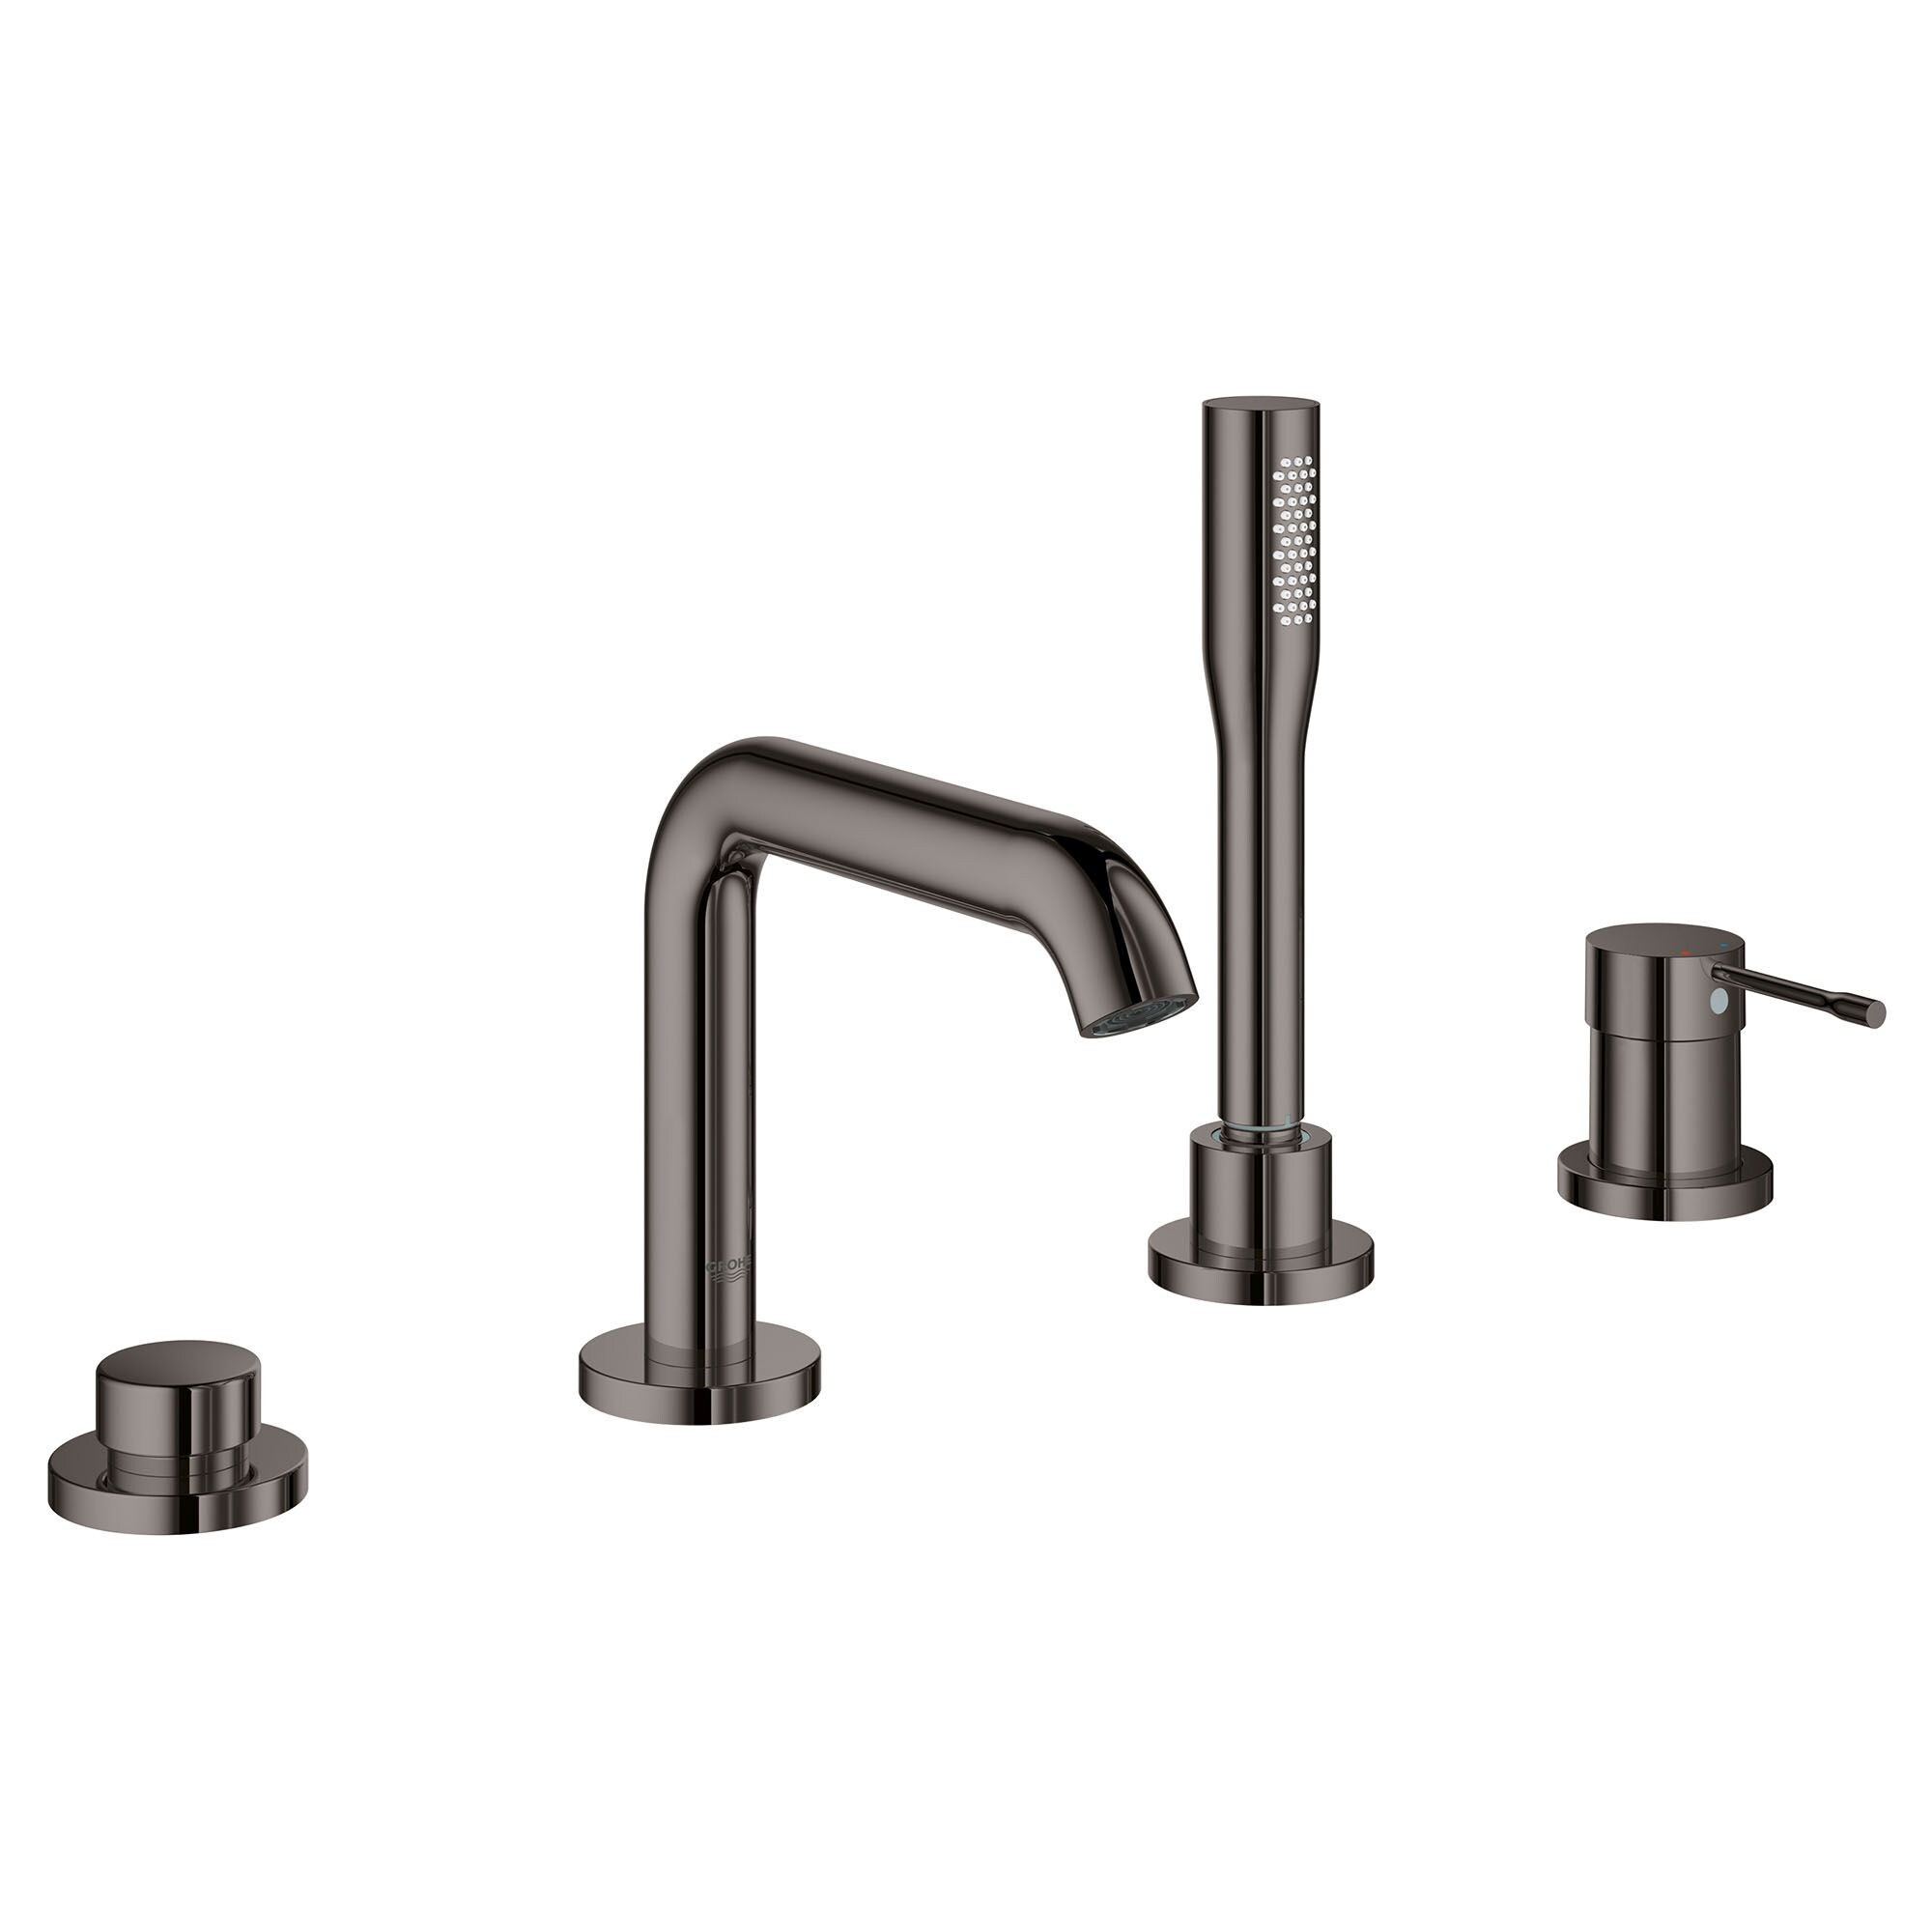 GROHE Essence New Graphite 1-handle Deck-mount Bathtub Faucet with Hand Shower in the Bathtub Faucets department at Lowes.com